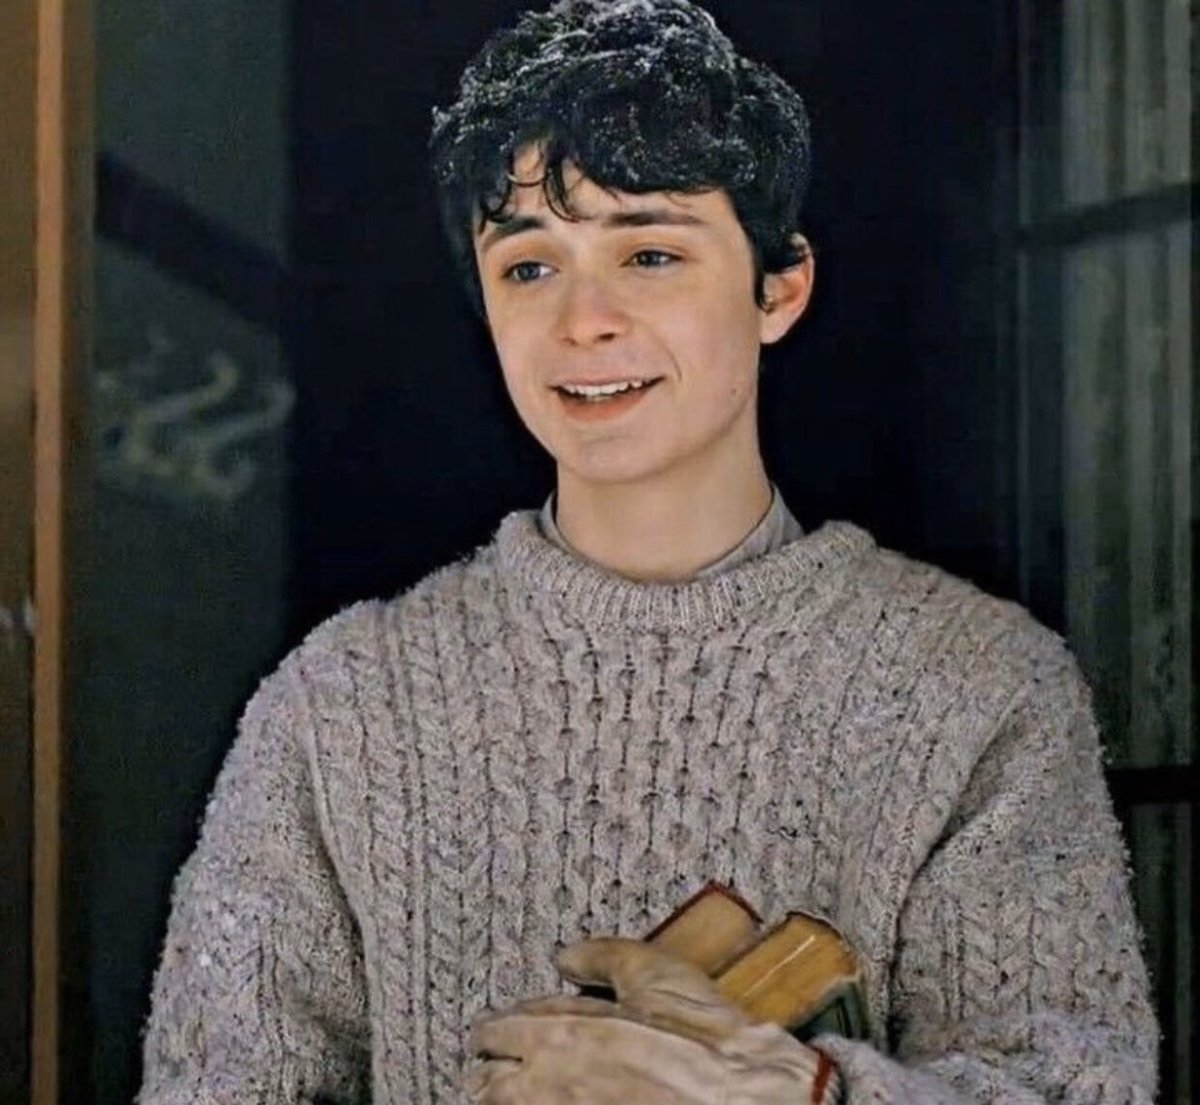 Snowy Gilbert vibes, the snow on his hair. It’s a look and the snowy puppy the two couldn’t be more adorable. #renewannewithane